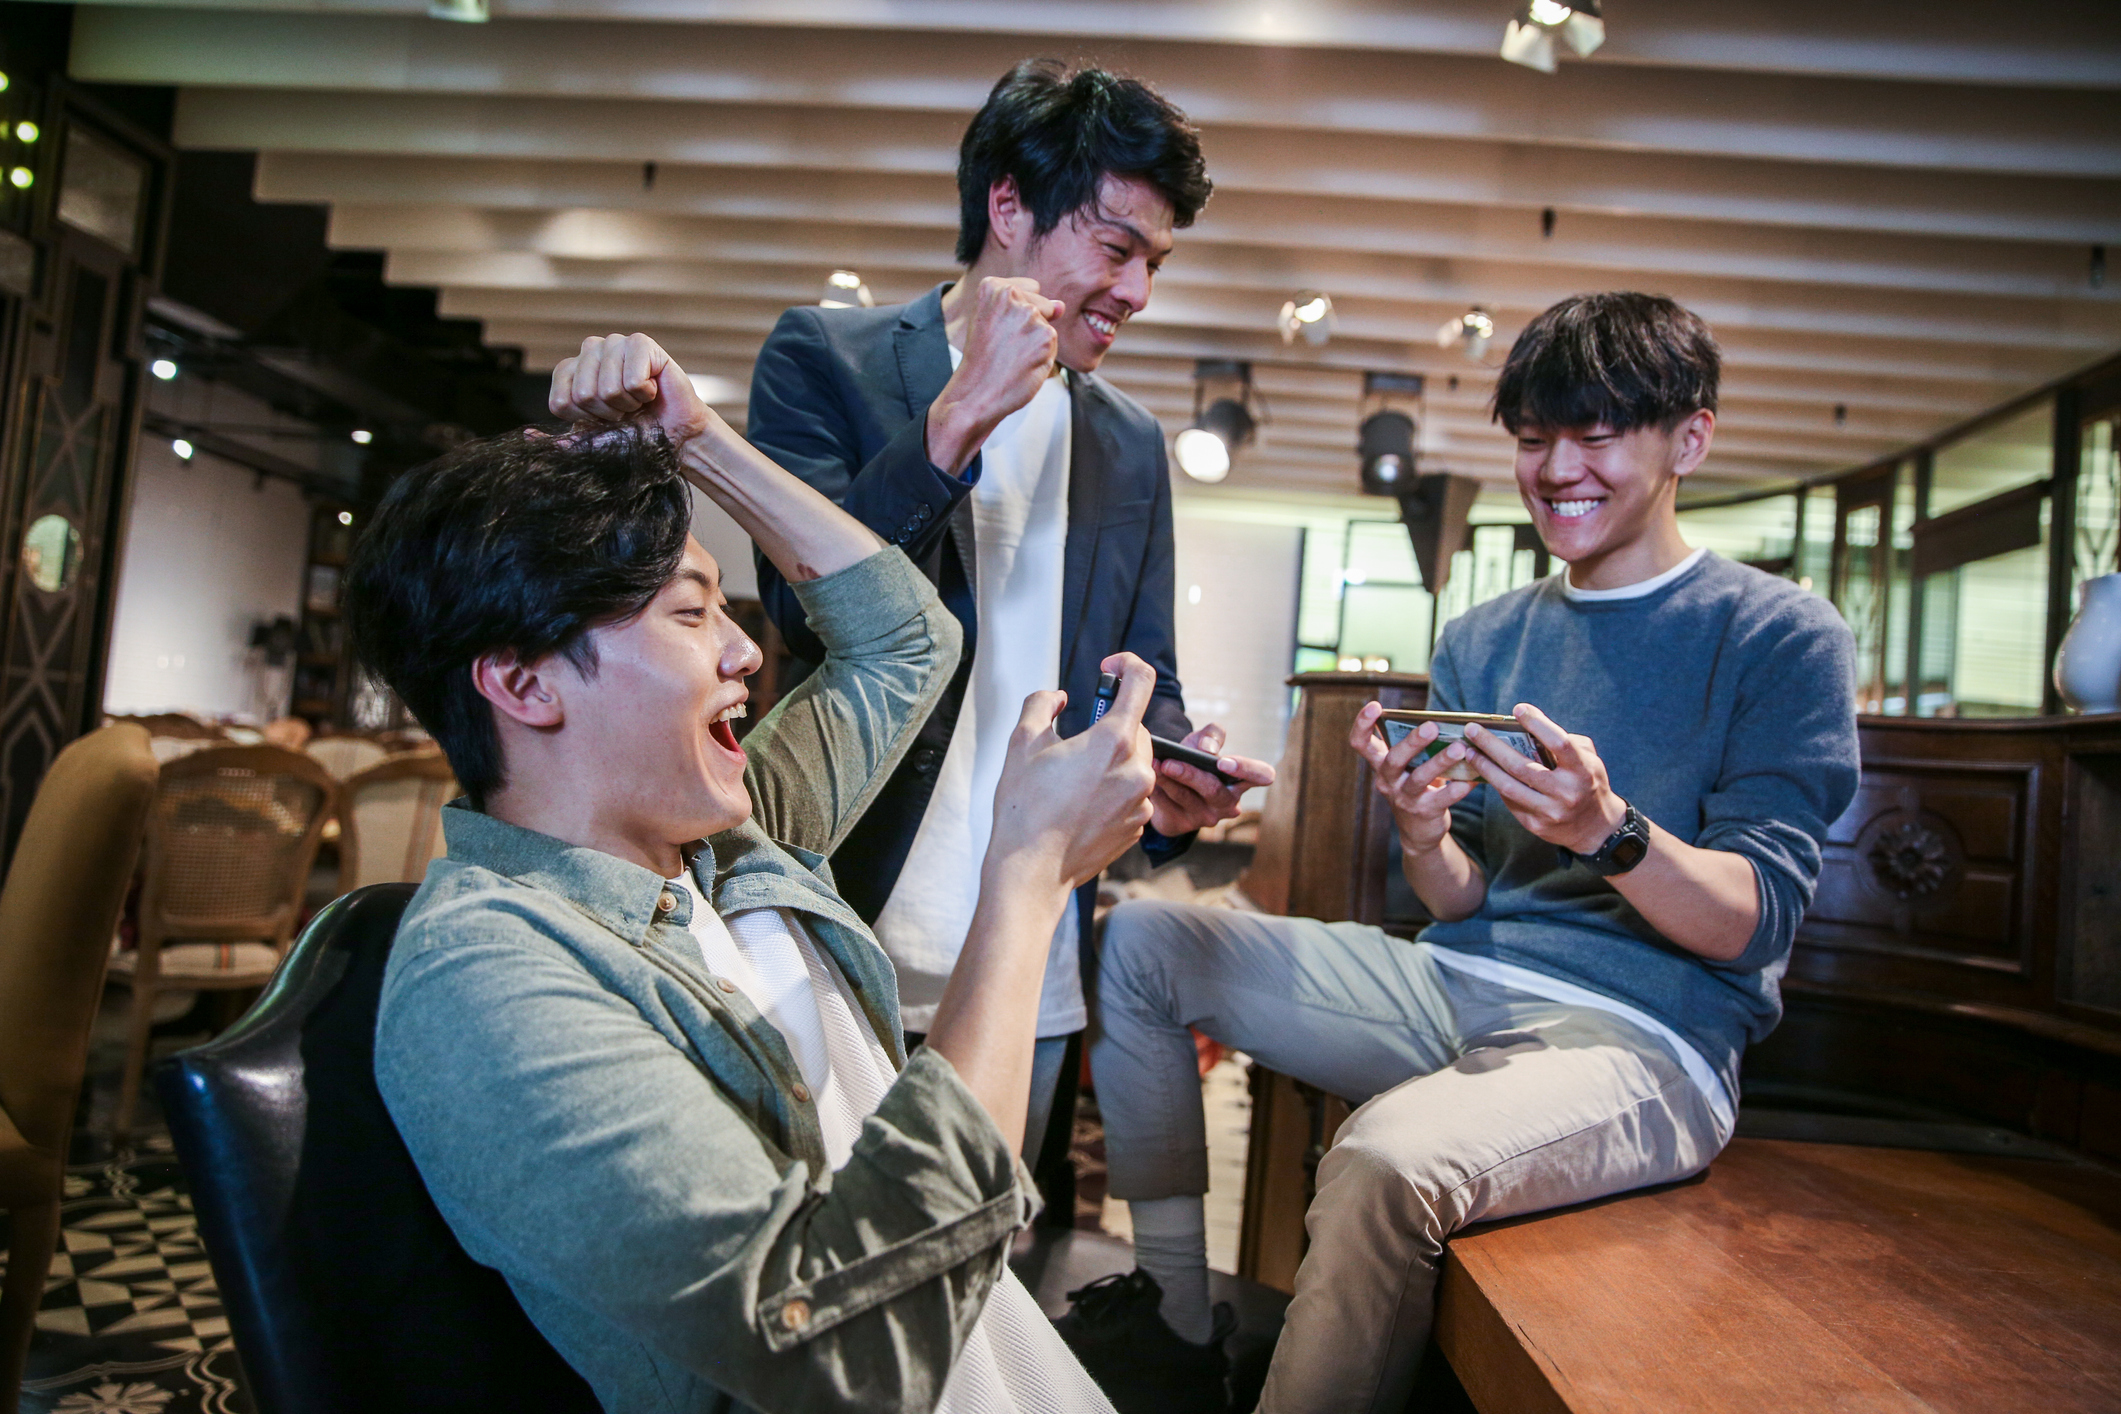 Three guys playing games on their phones and celebrating.